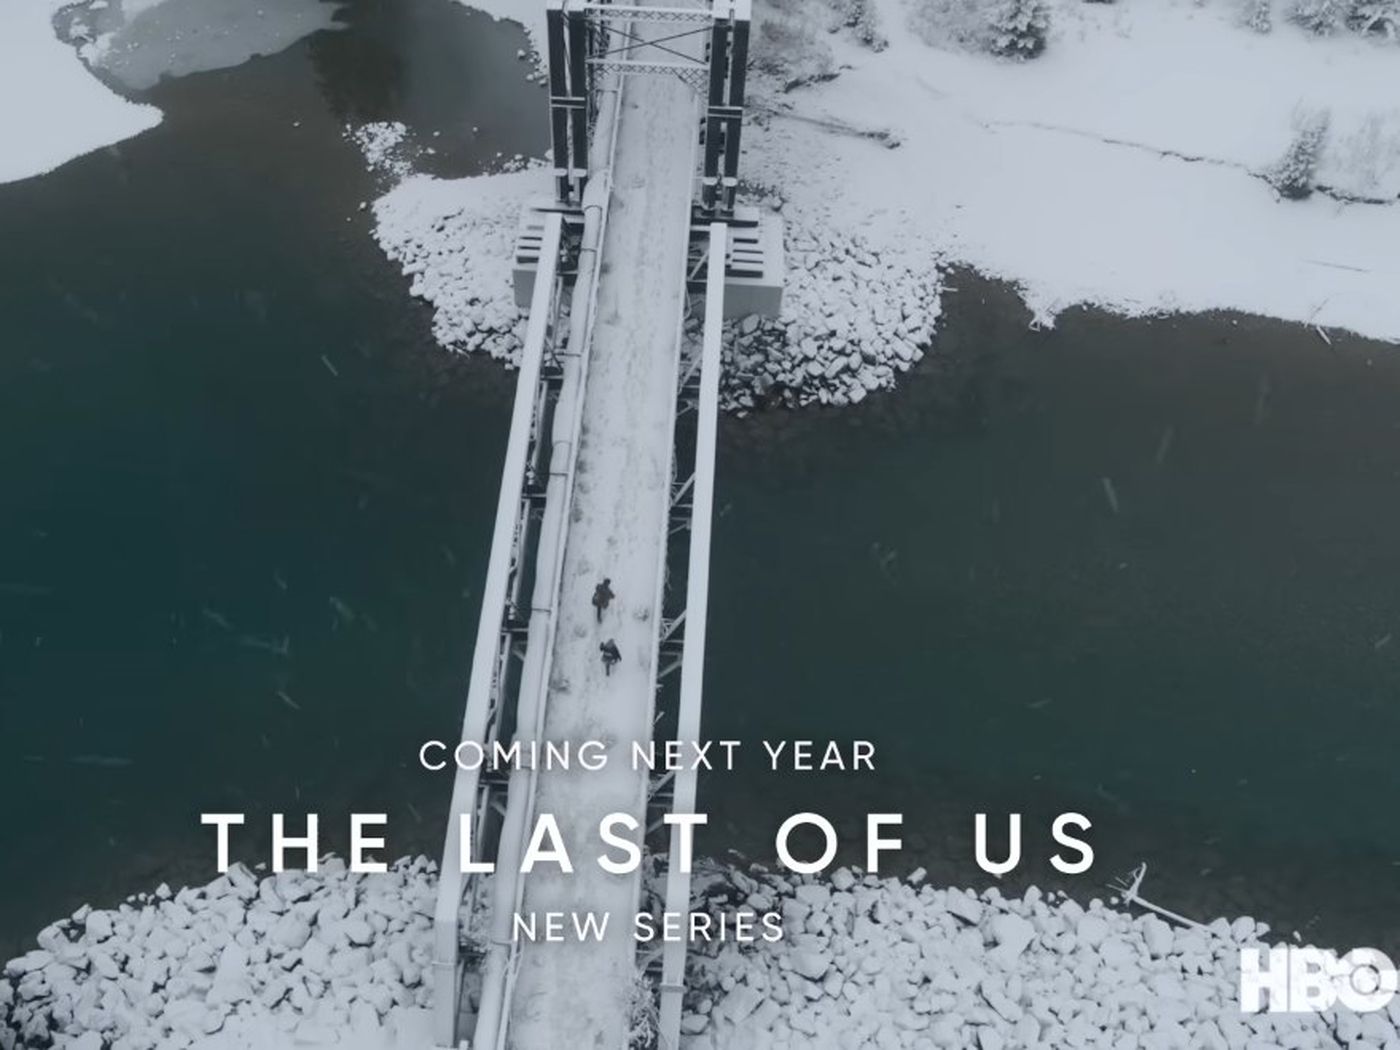 HBO teases The Last of Us TV show ahead of its 2023 premiere